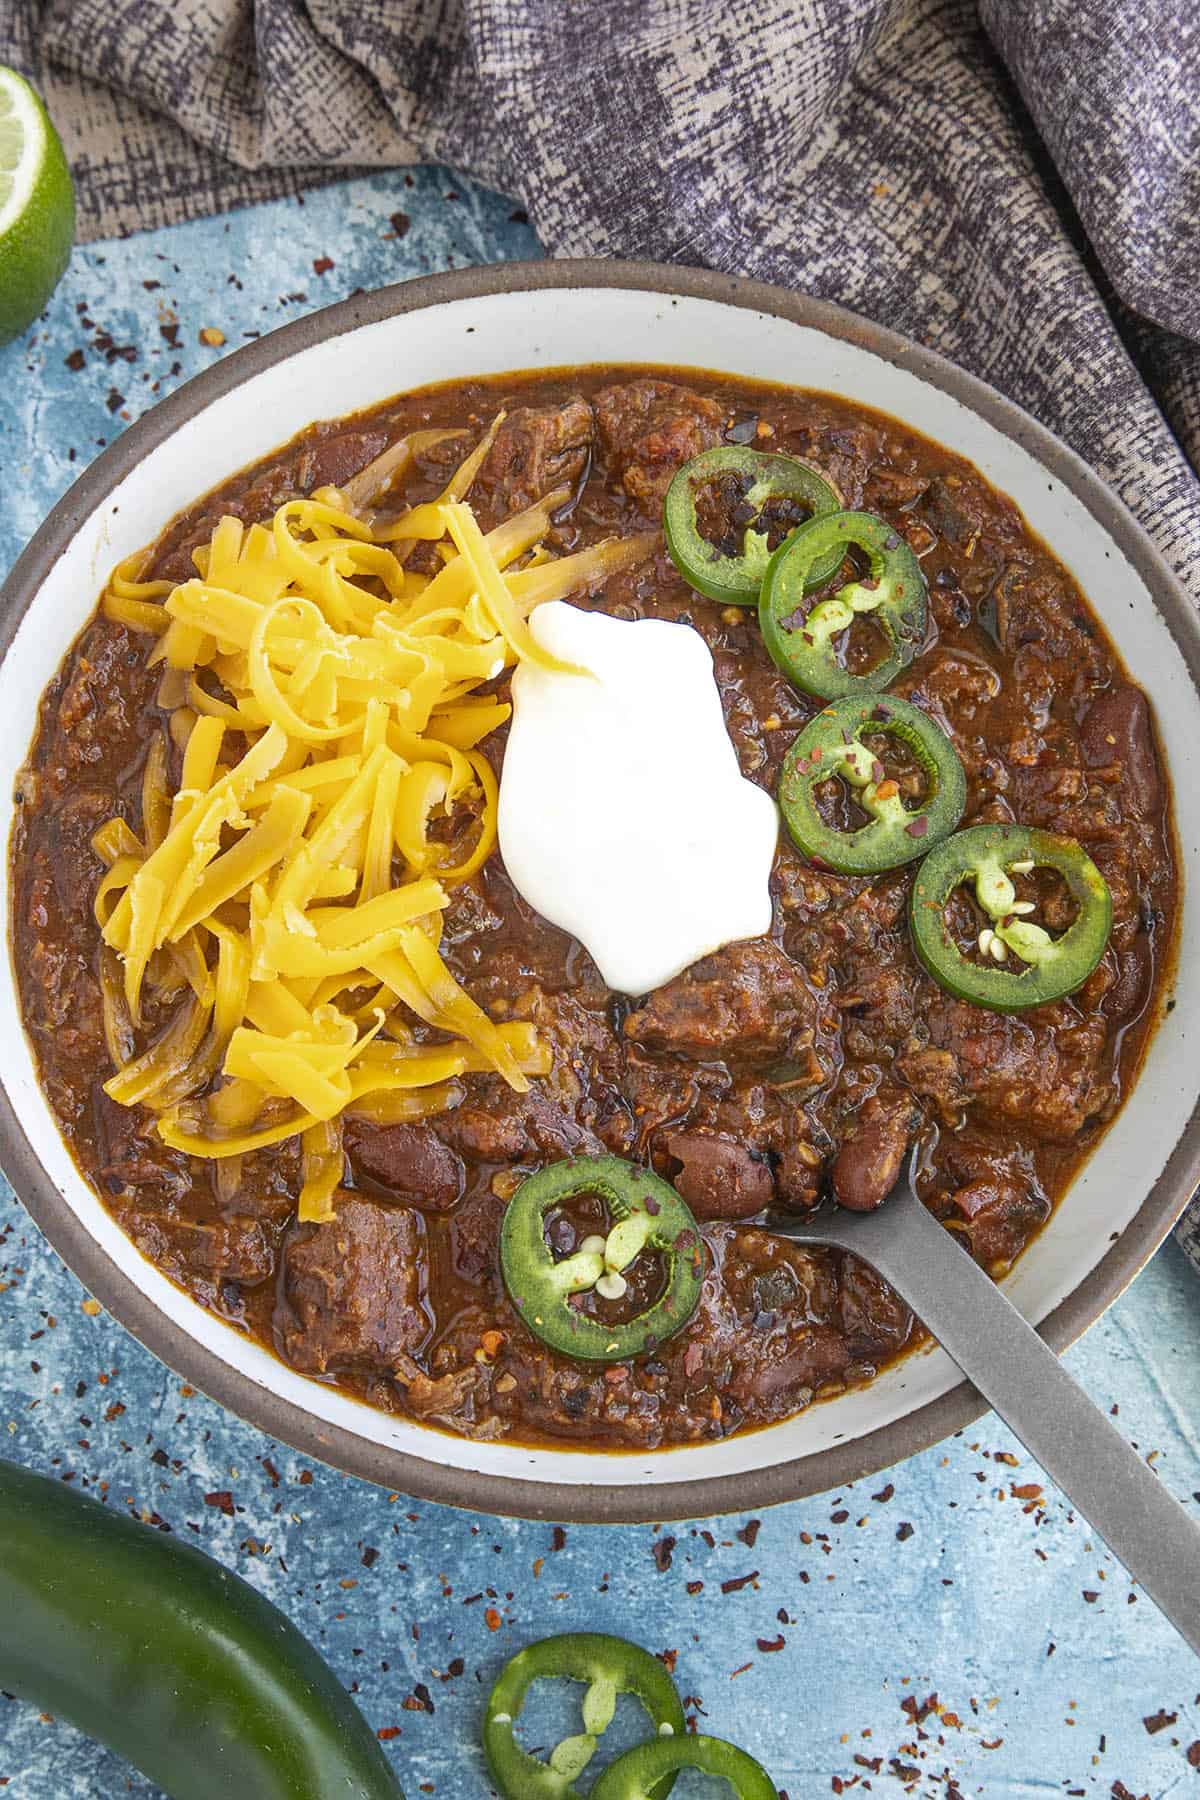 Brisket Chili in a bowl, topped with cheddar cheese, sour cream, and jalapeno slices